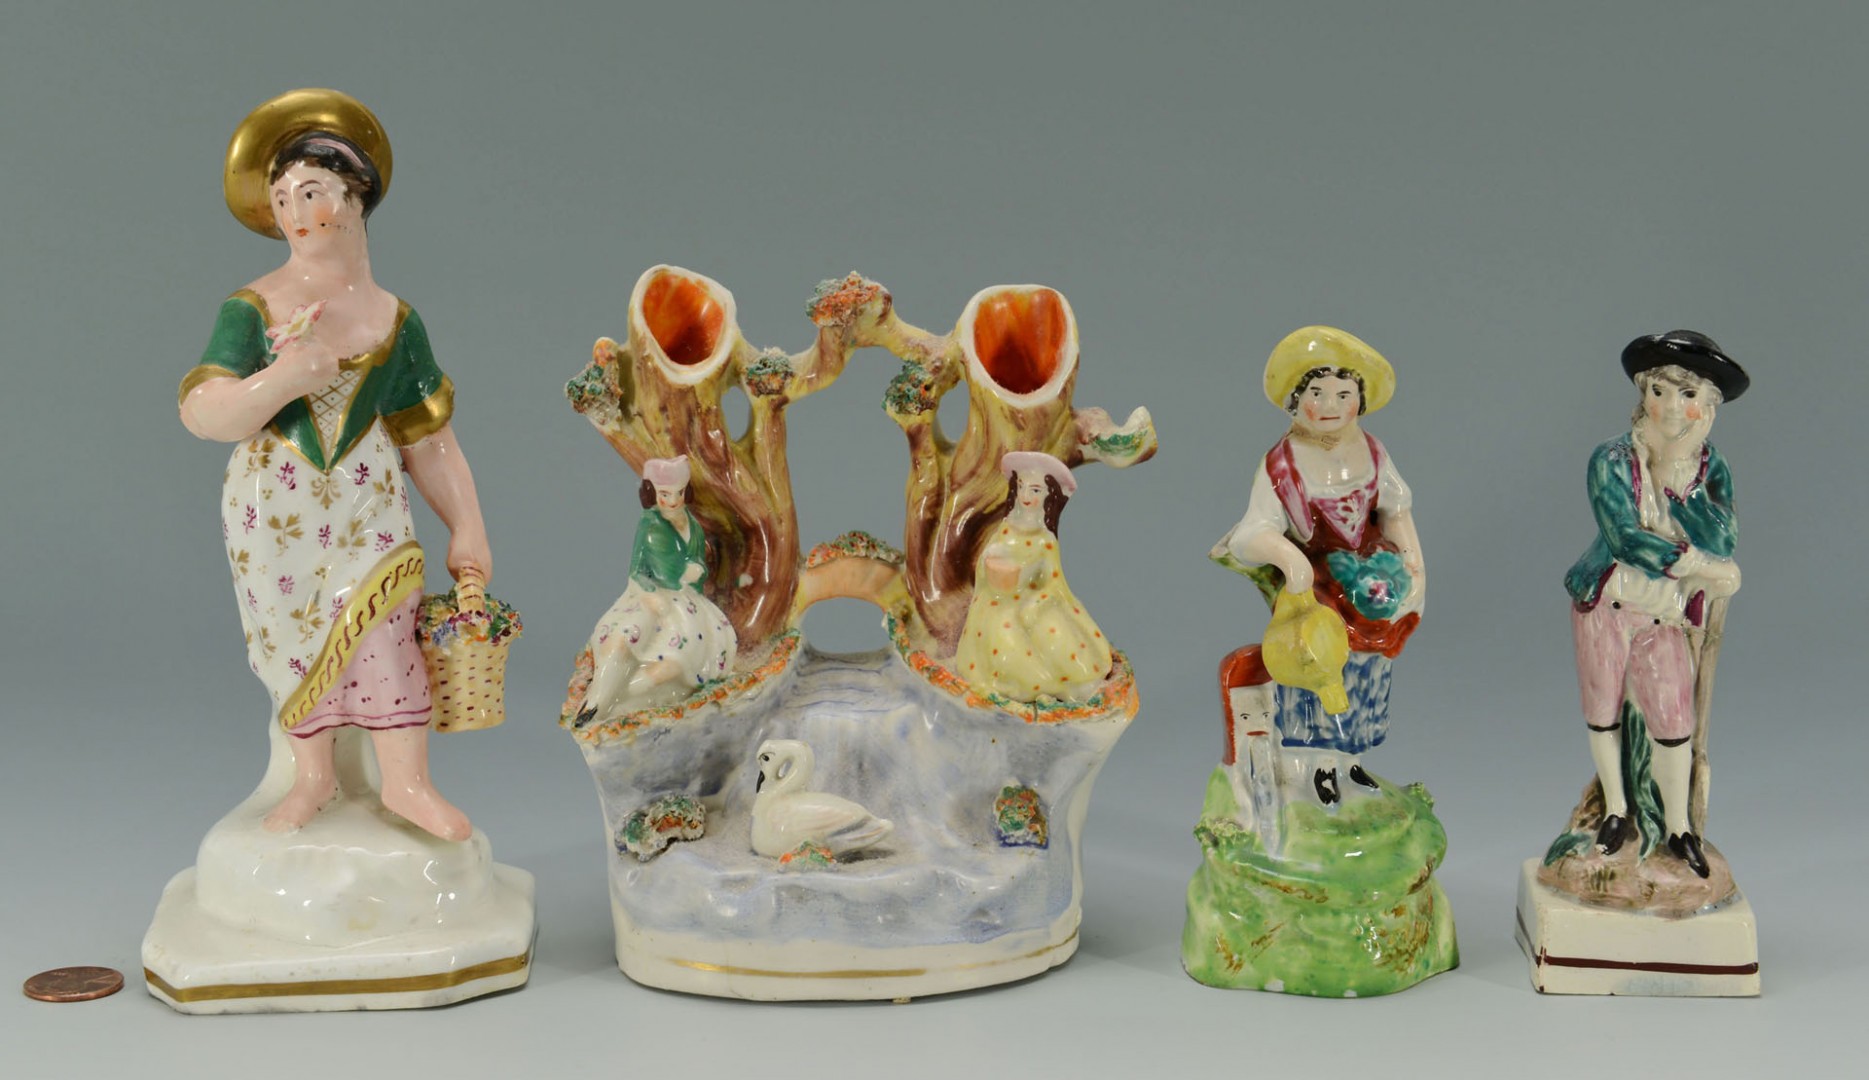 Lot 434: Grouping of 4 Staffordshire Figures